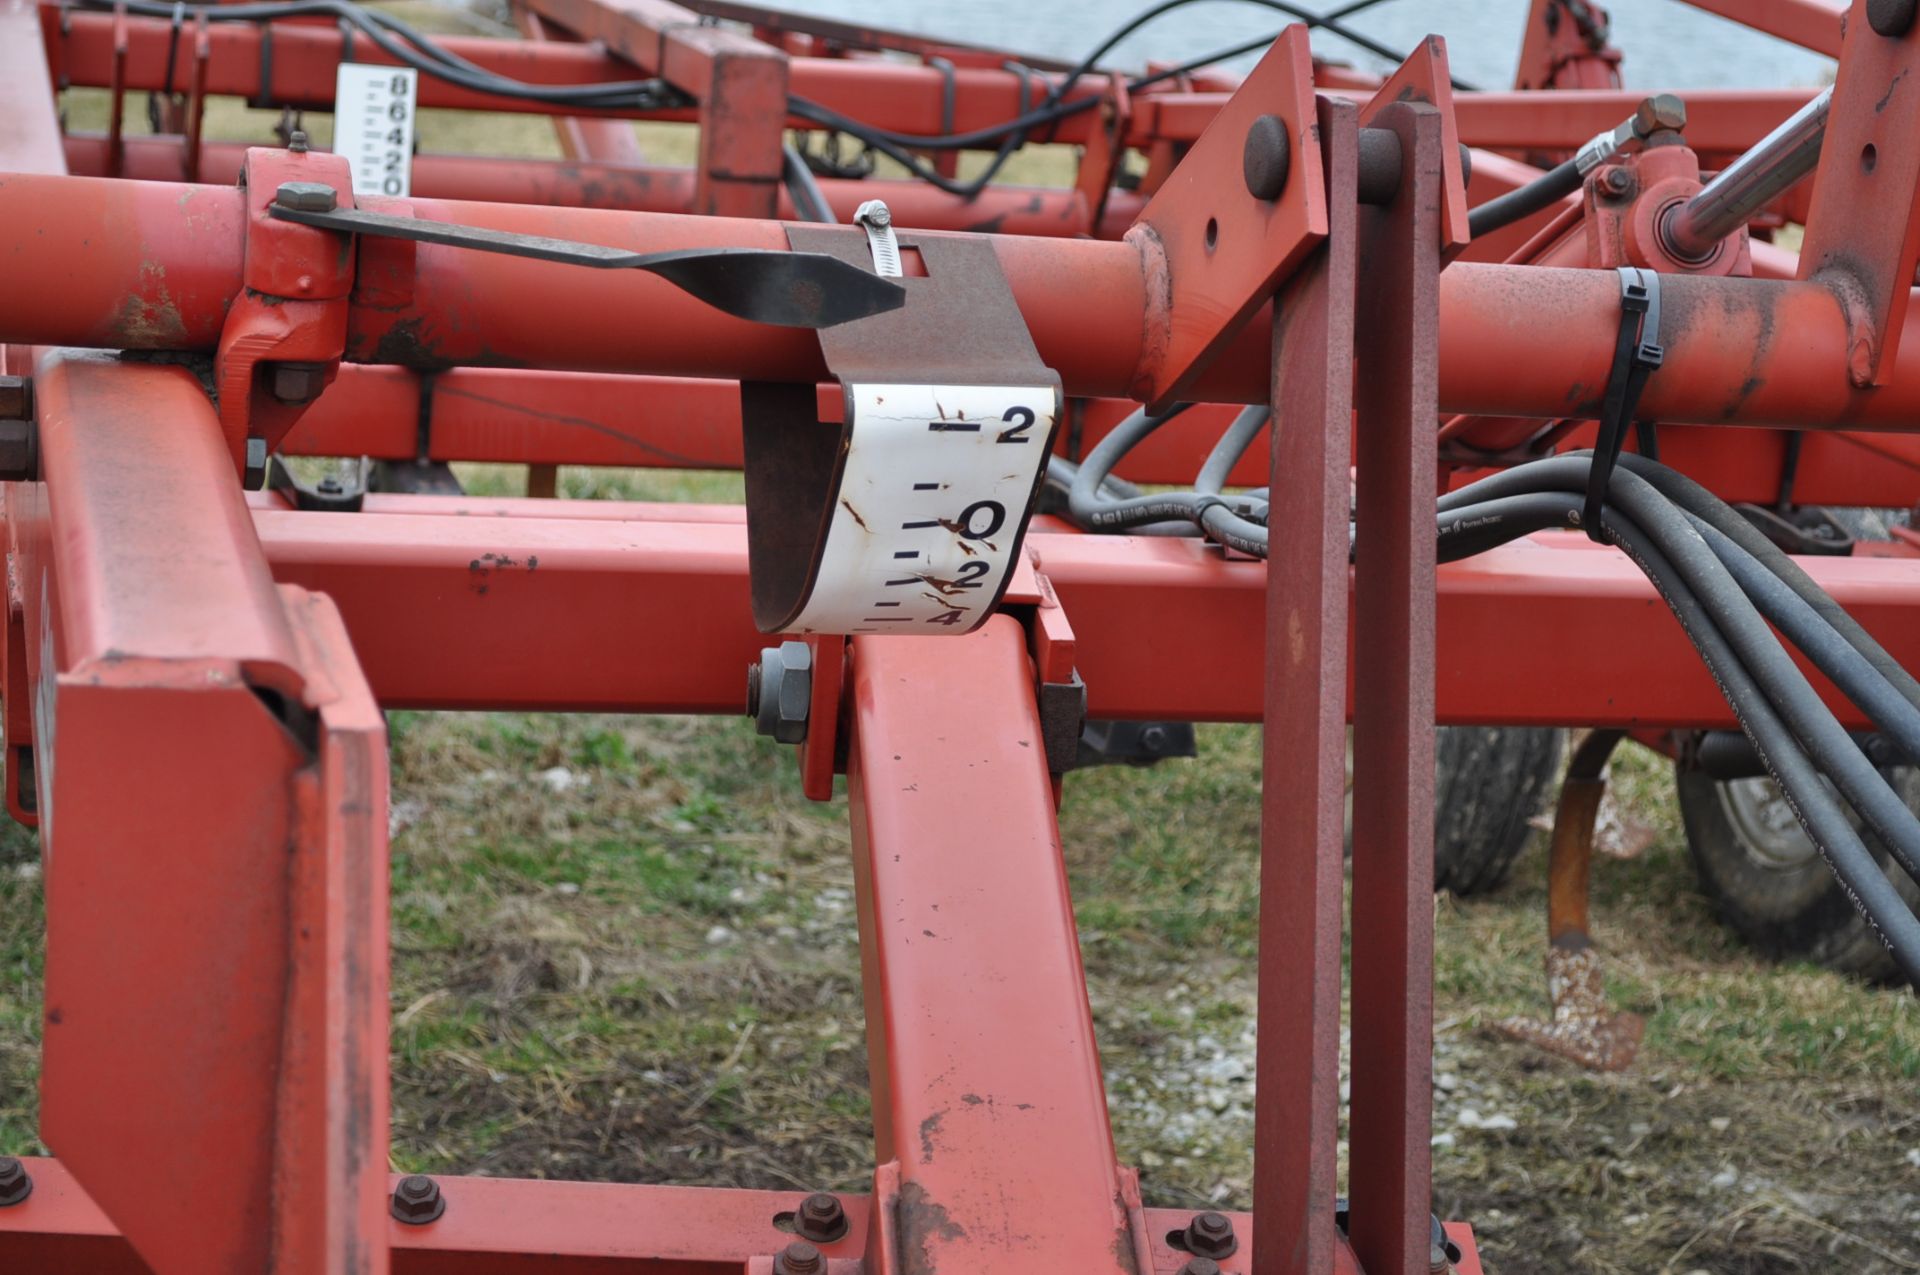 15’ Case IH 4200 mulch finisher, front disc, 5 bar harrow, rear hitch, SN JAG0690325 - Image 11 of 12